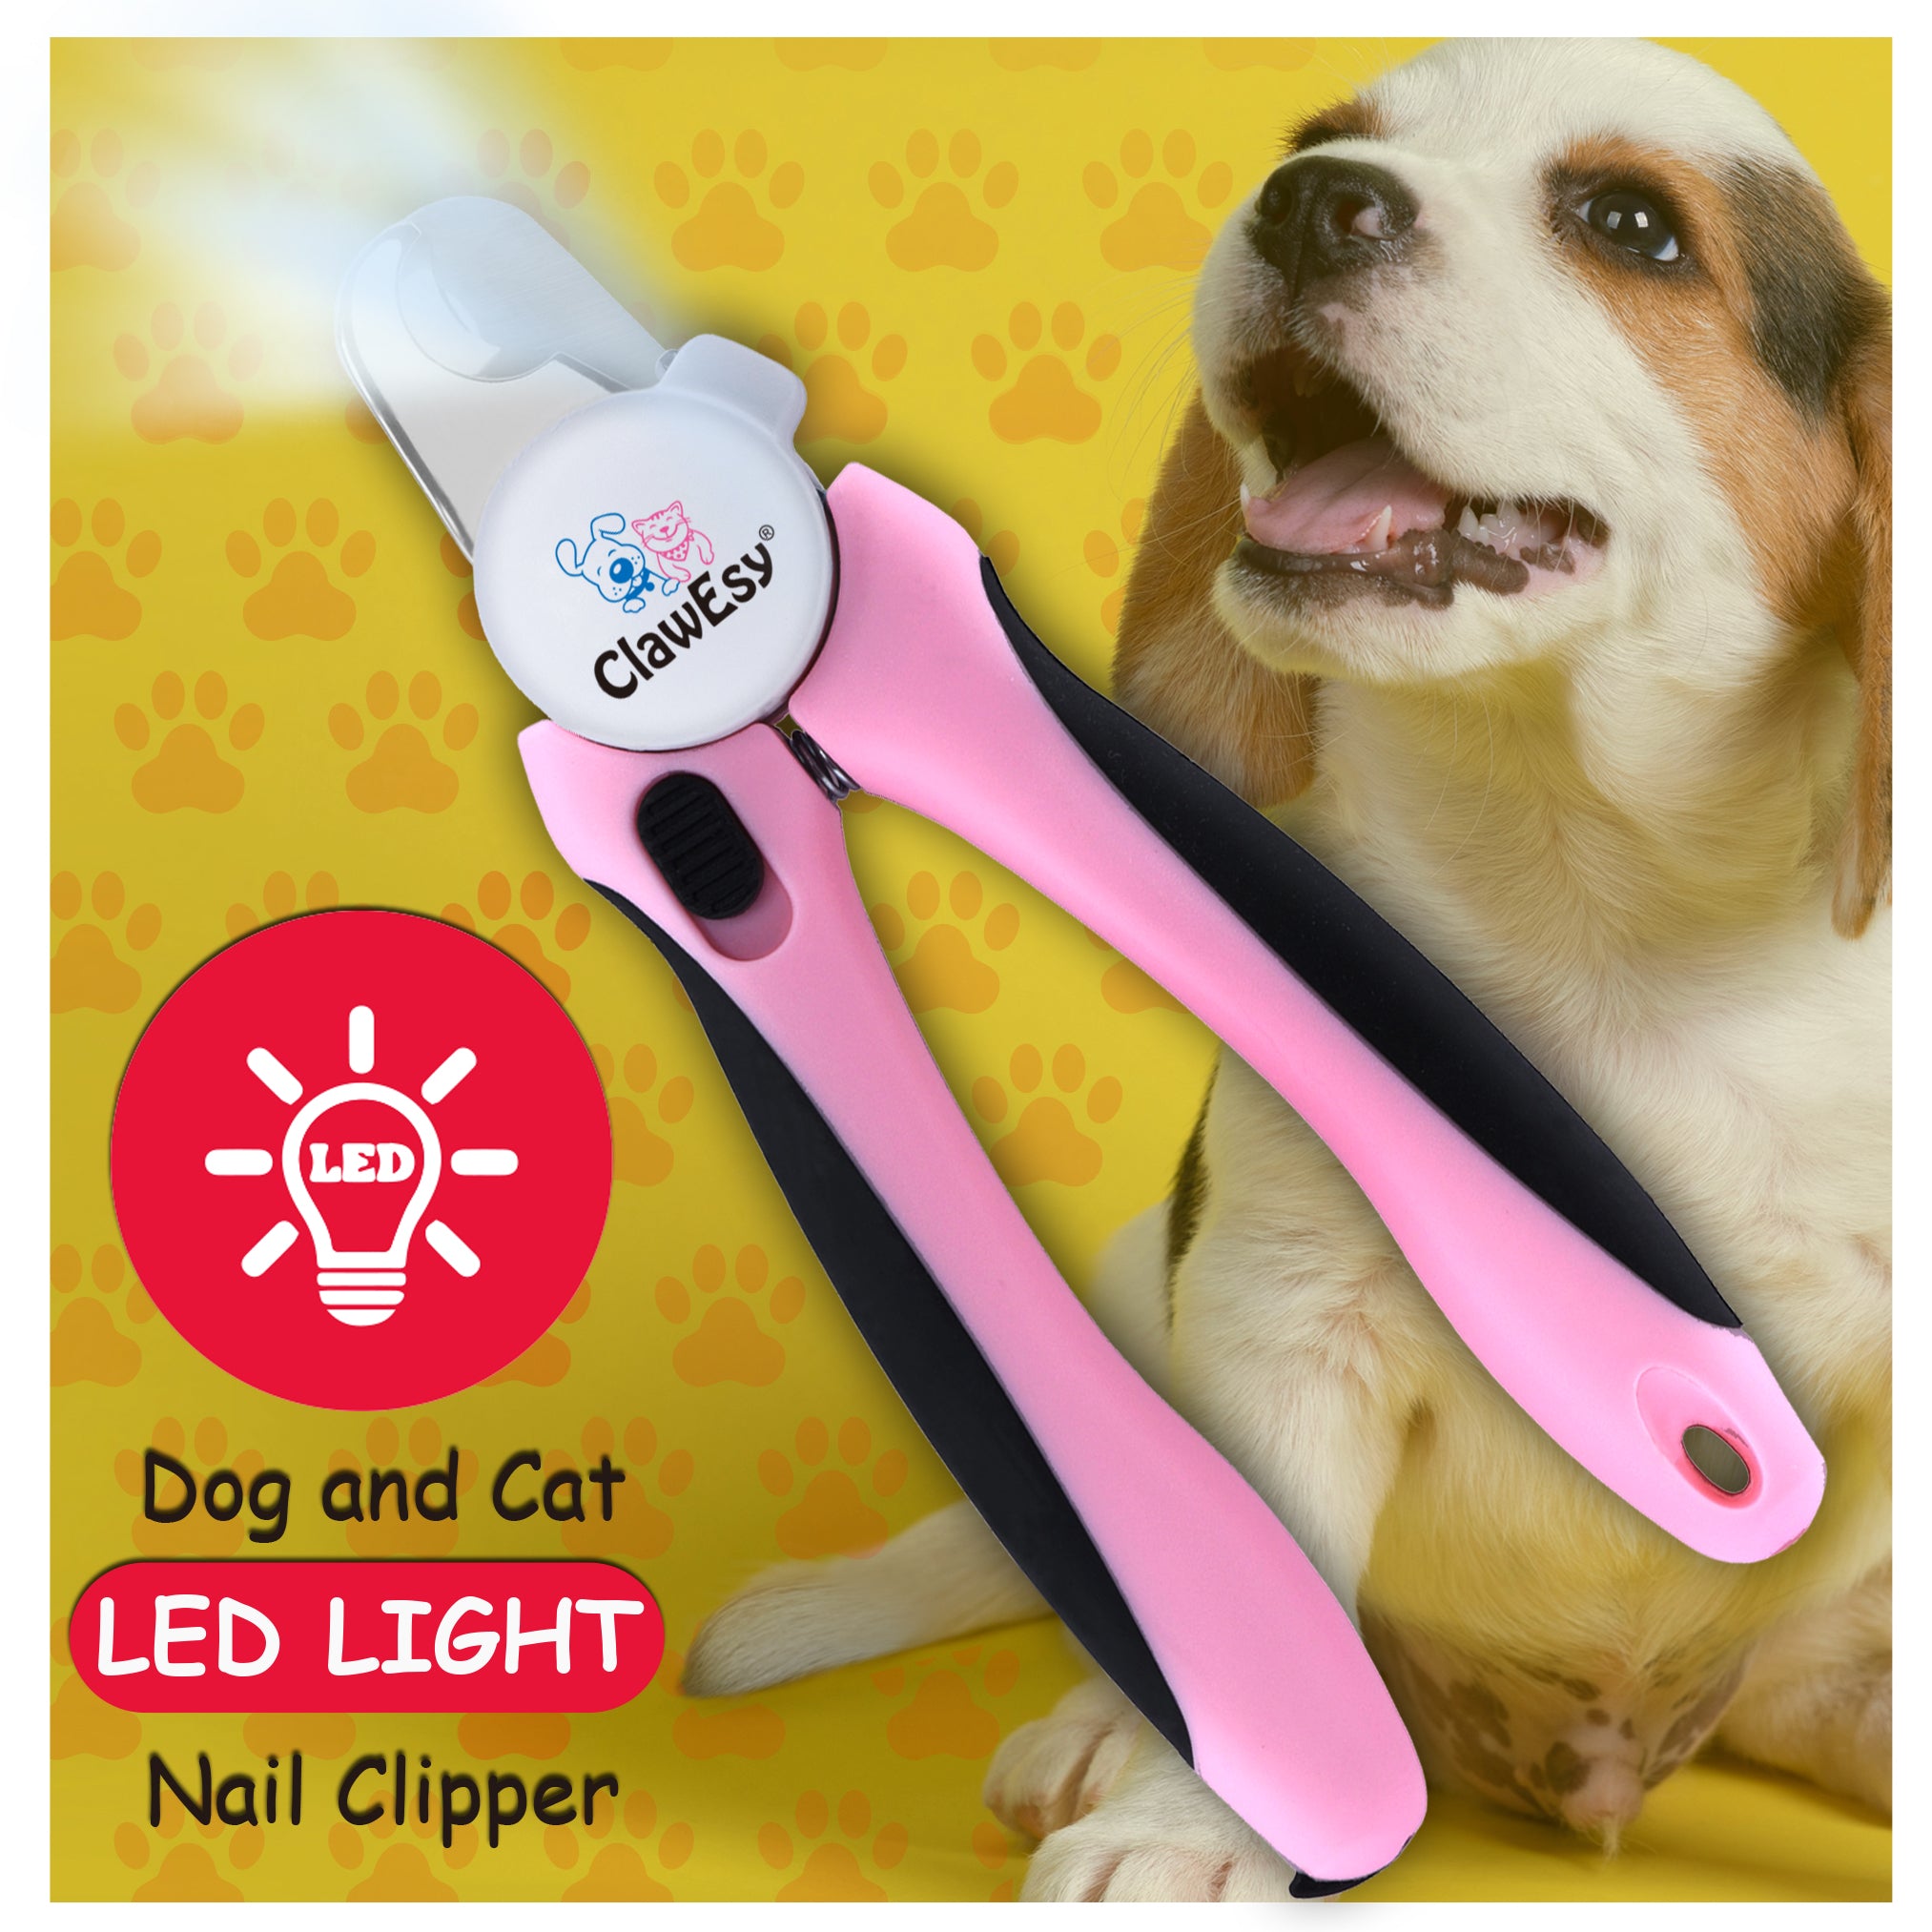 LED Dog Nail Clippers with Safety Guard, LED Light and Nail File - Ultra  Sharp Heavy Duty Nail Clippers for Thick Nails - Safe Grip Professional Pet